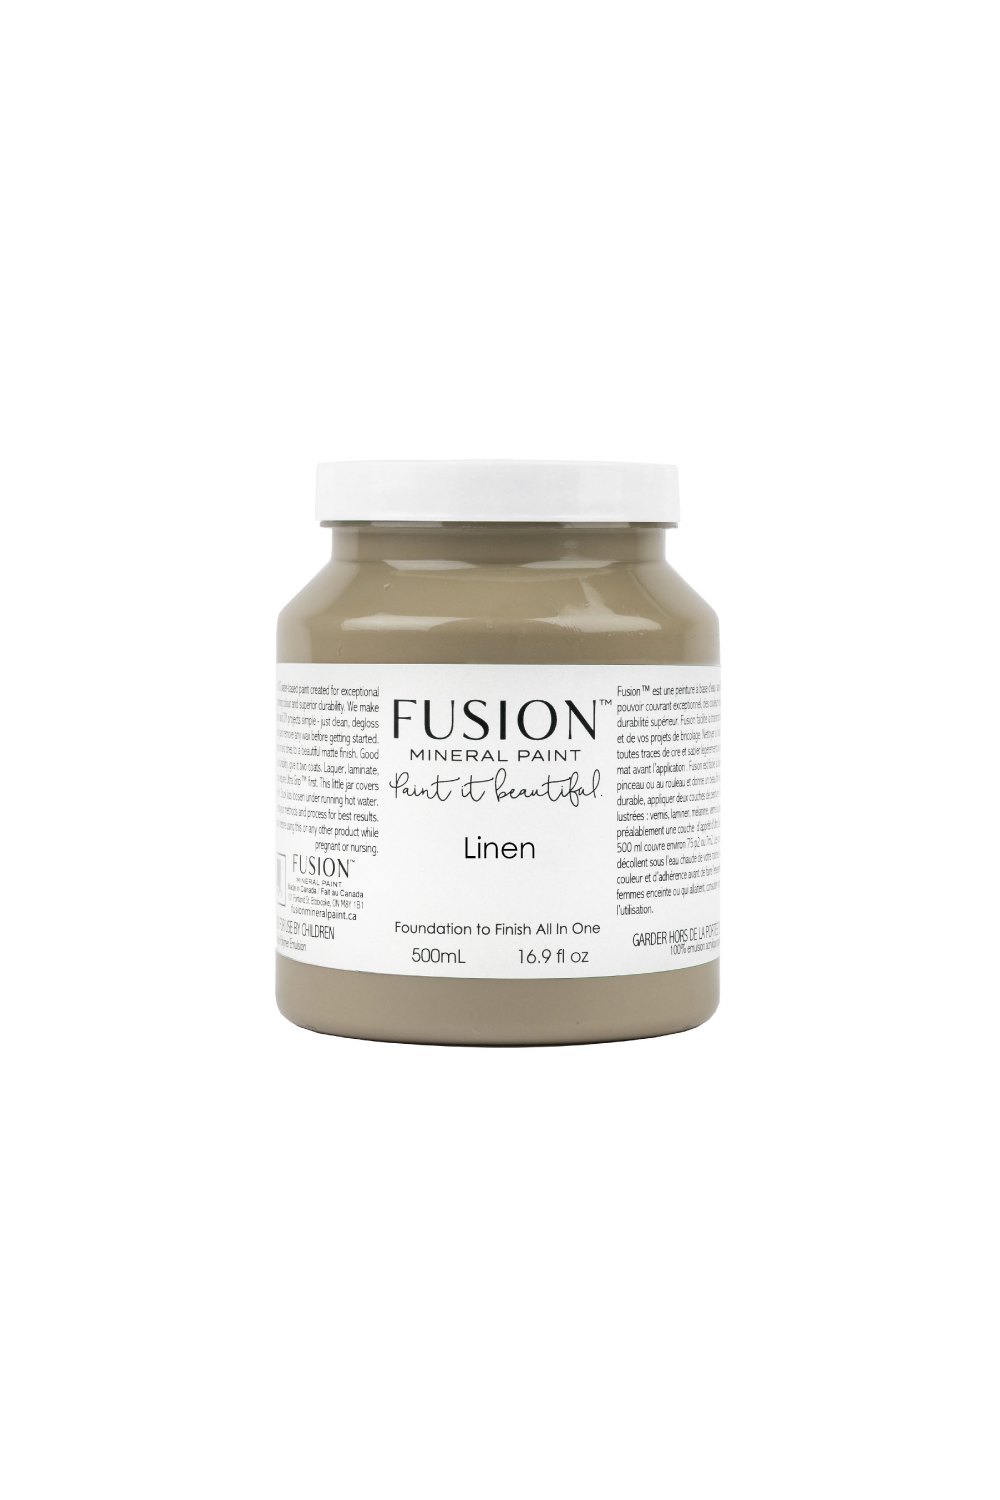 Fusion Mineral Paint vernice ecologica color lino